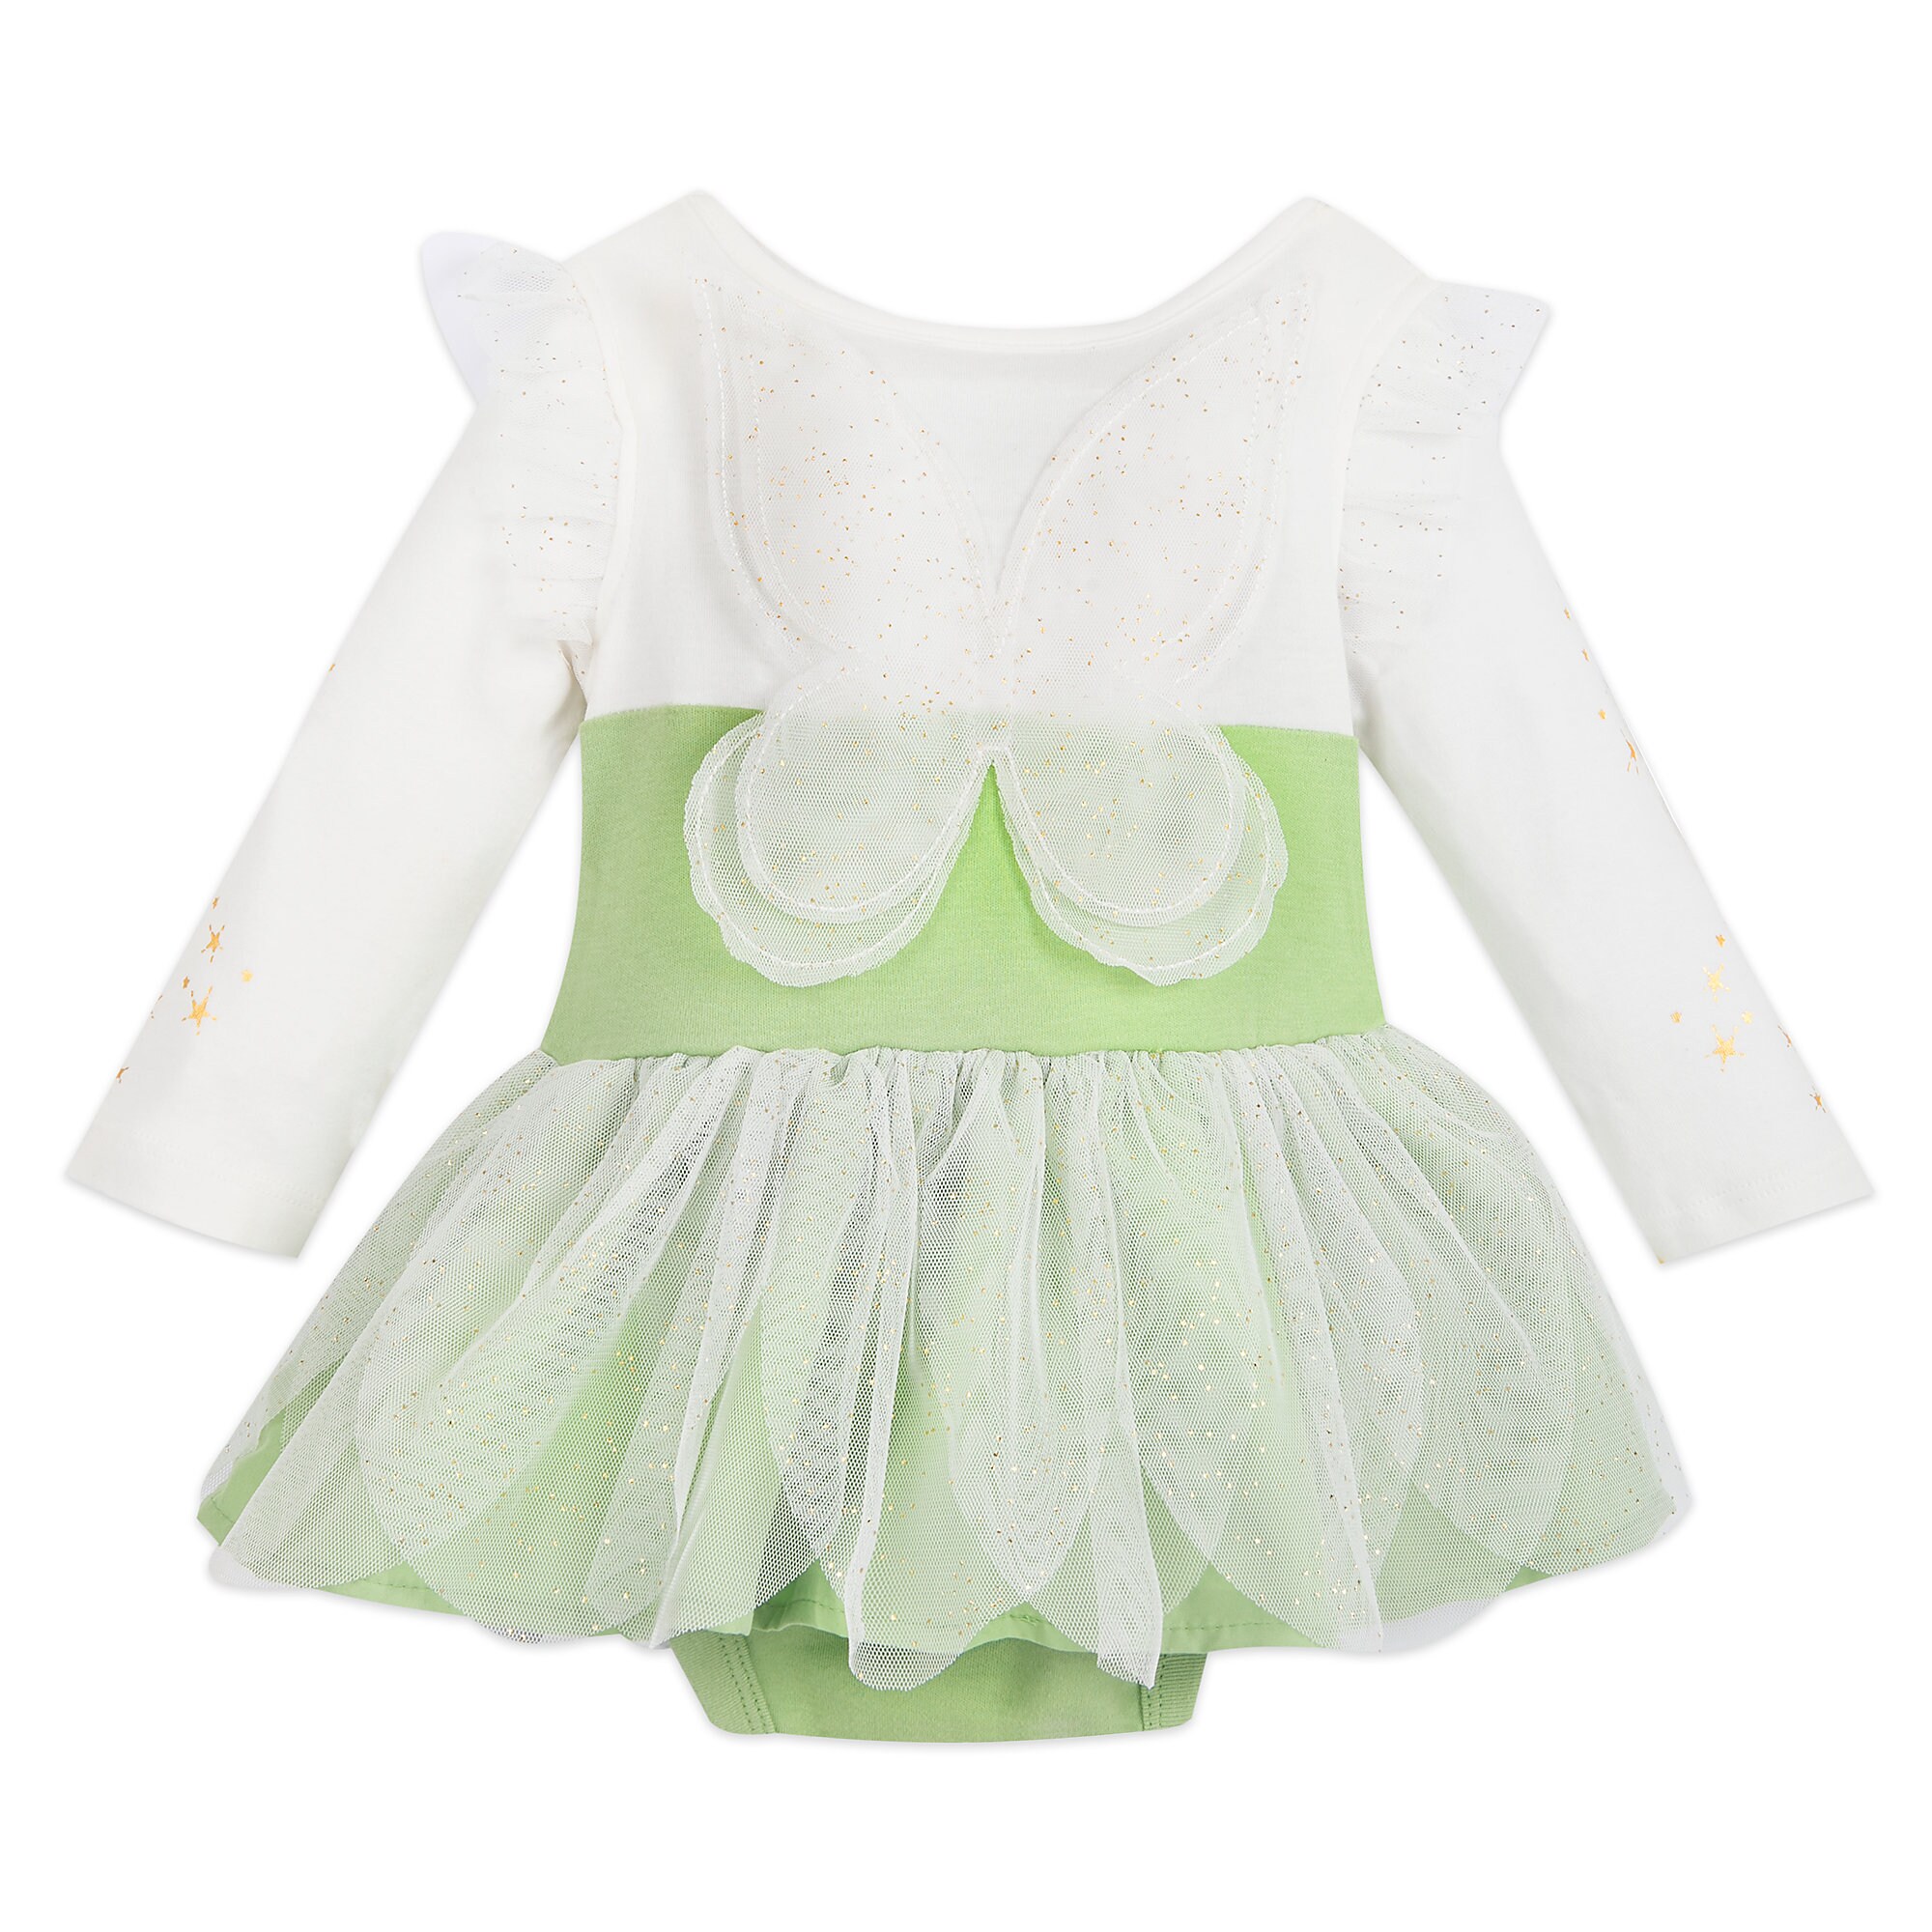 Tinker Bell Costume Bodysuit for Baby - Personalized